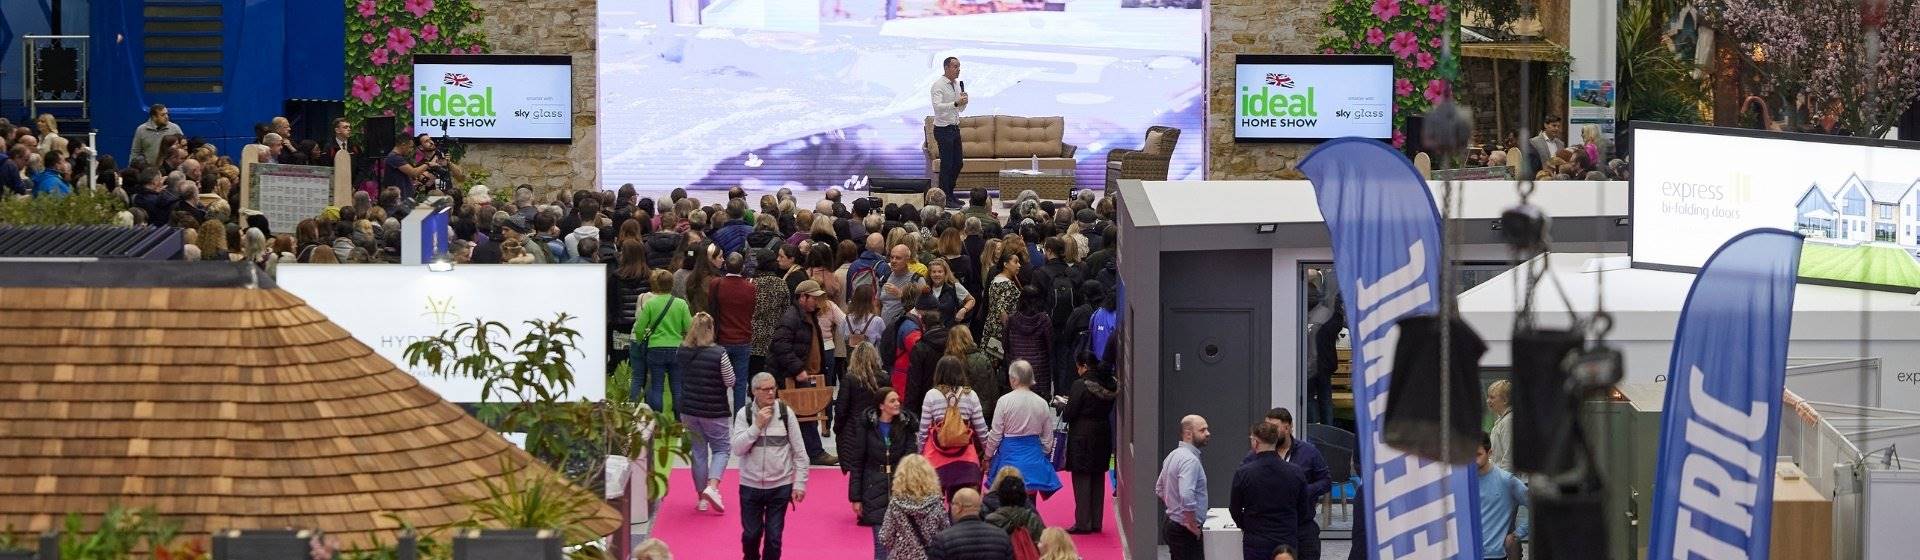 Ideal Home Show Audience